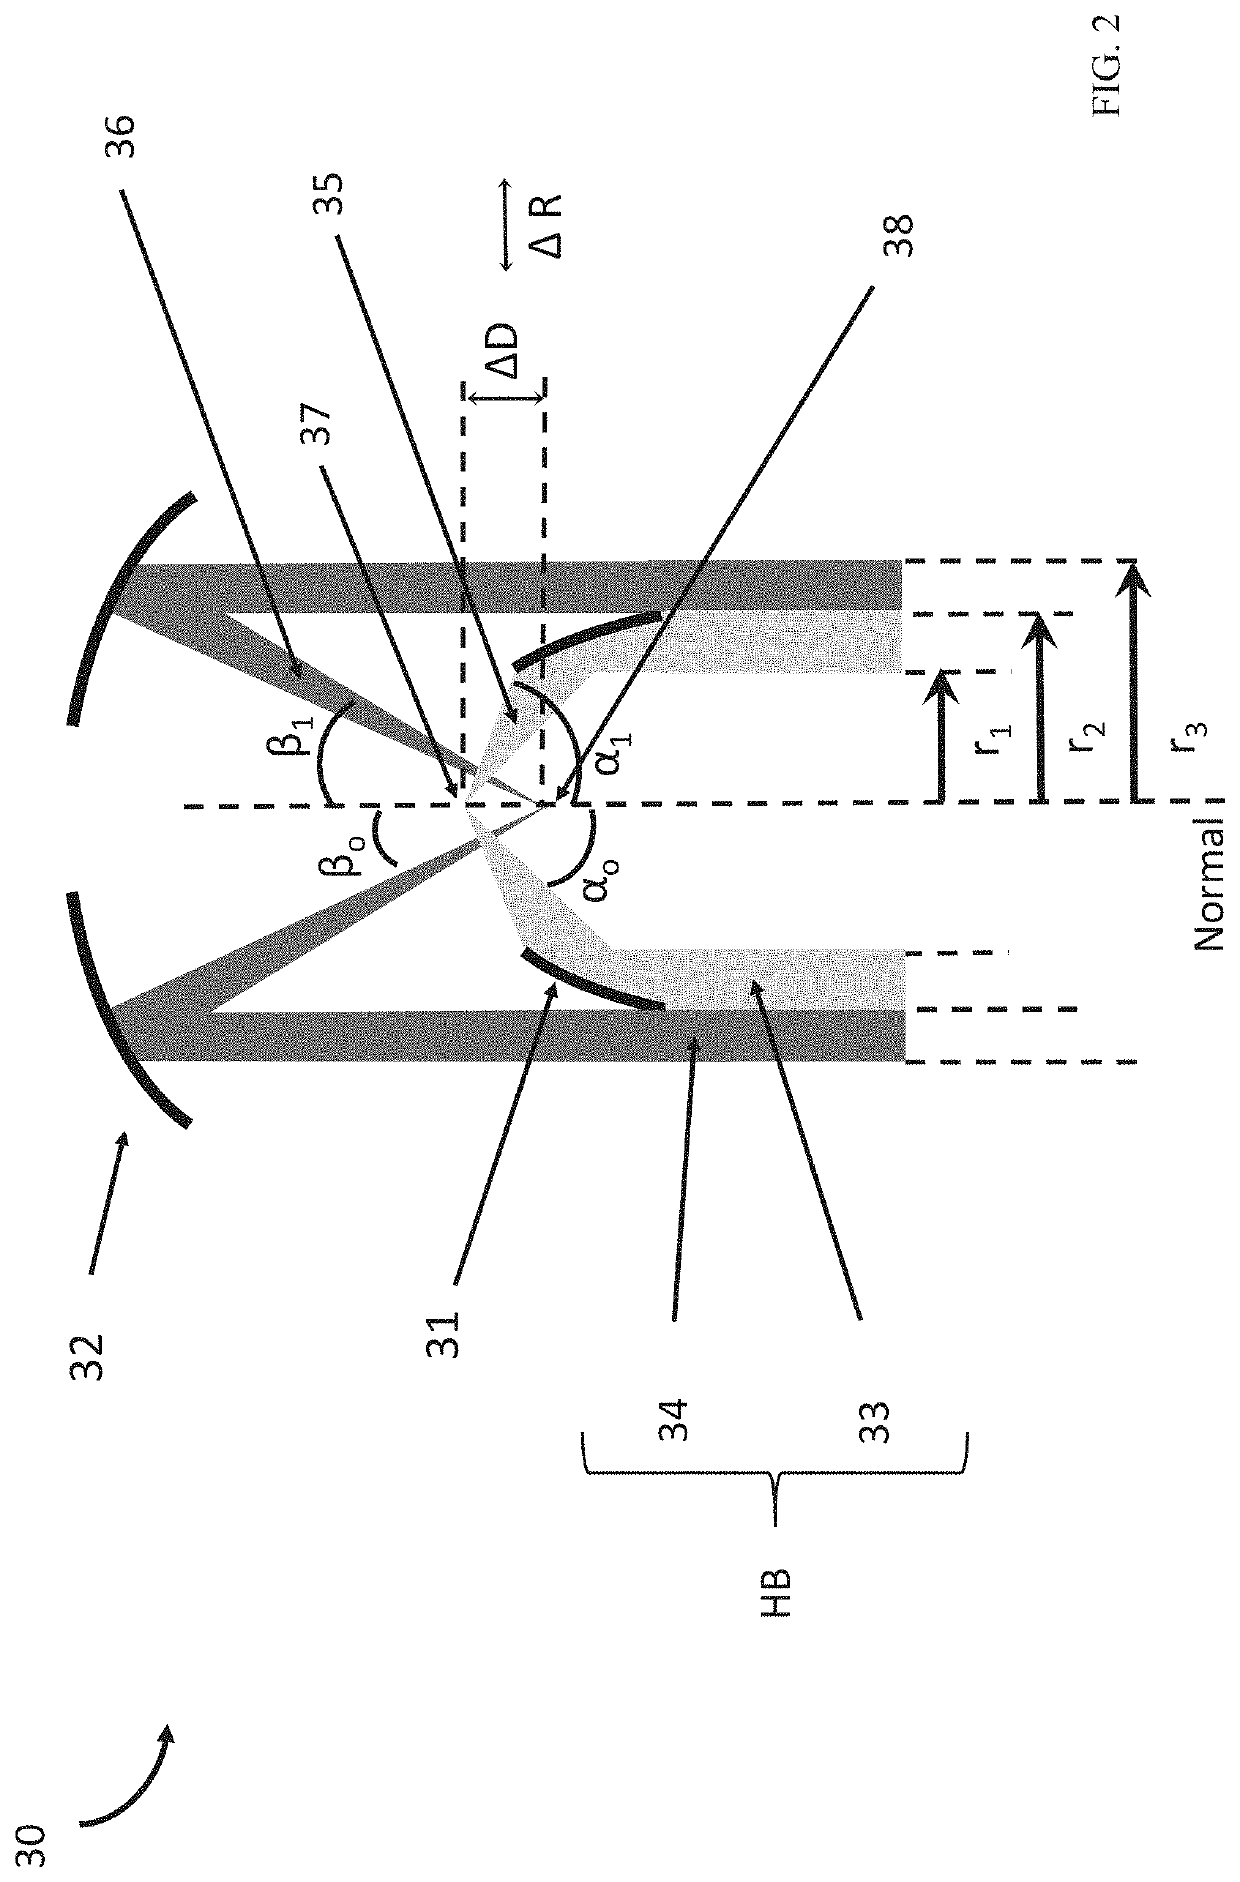 Optical trapping of airborne particles using dual counter-propagating hollow conical beams